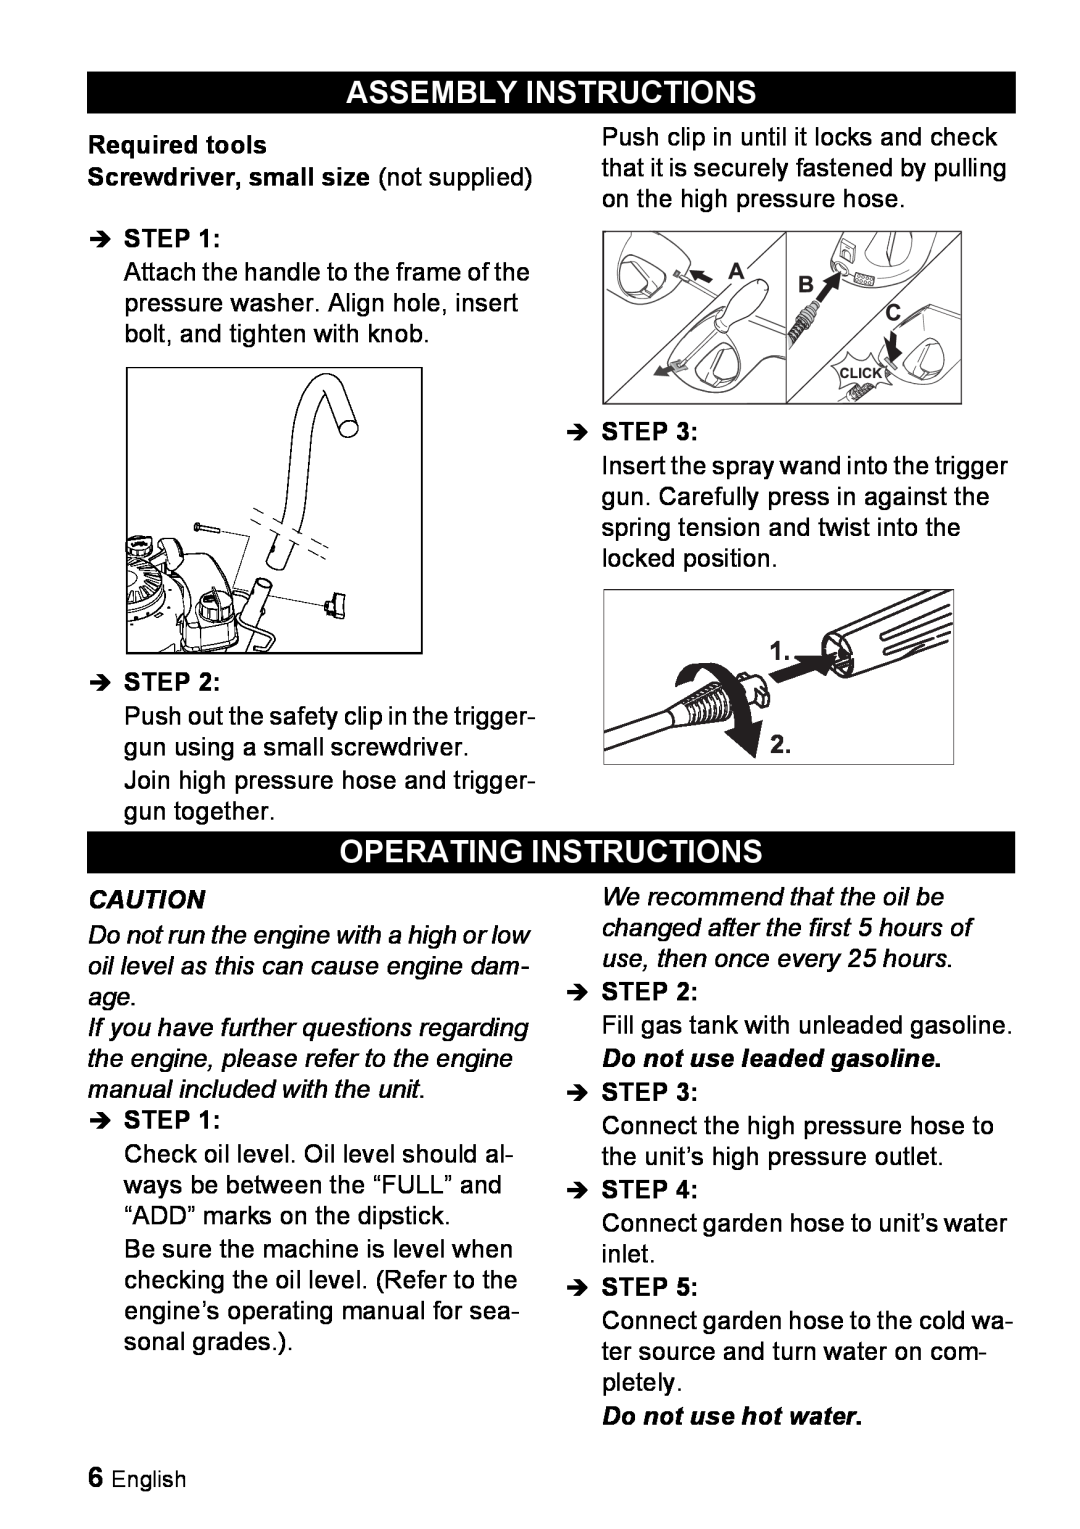 Karcher G 2000 ET manual Assembly Instructions, Operating Instructions, Do not use leaded gasoline, Do not use hot water 